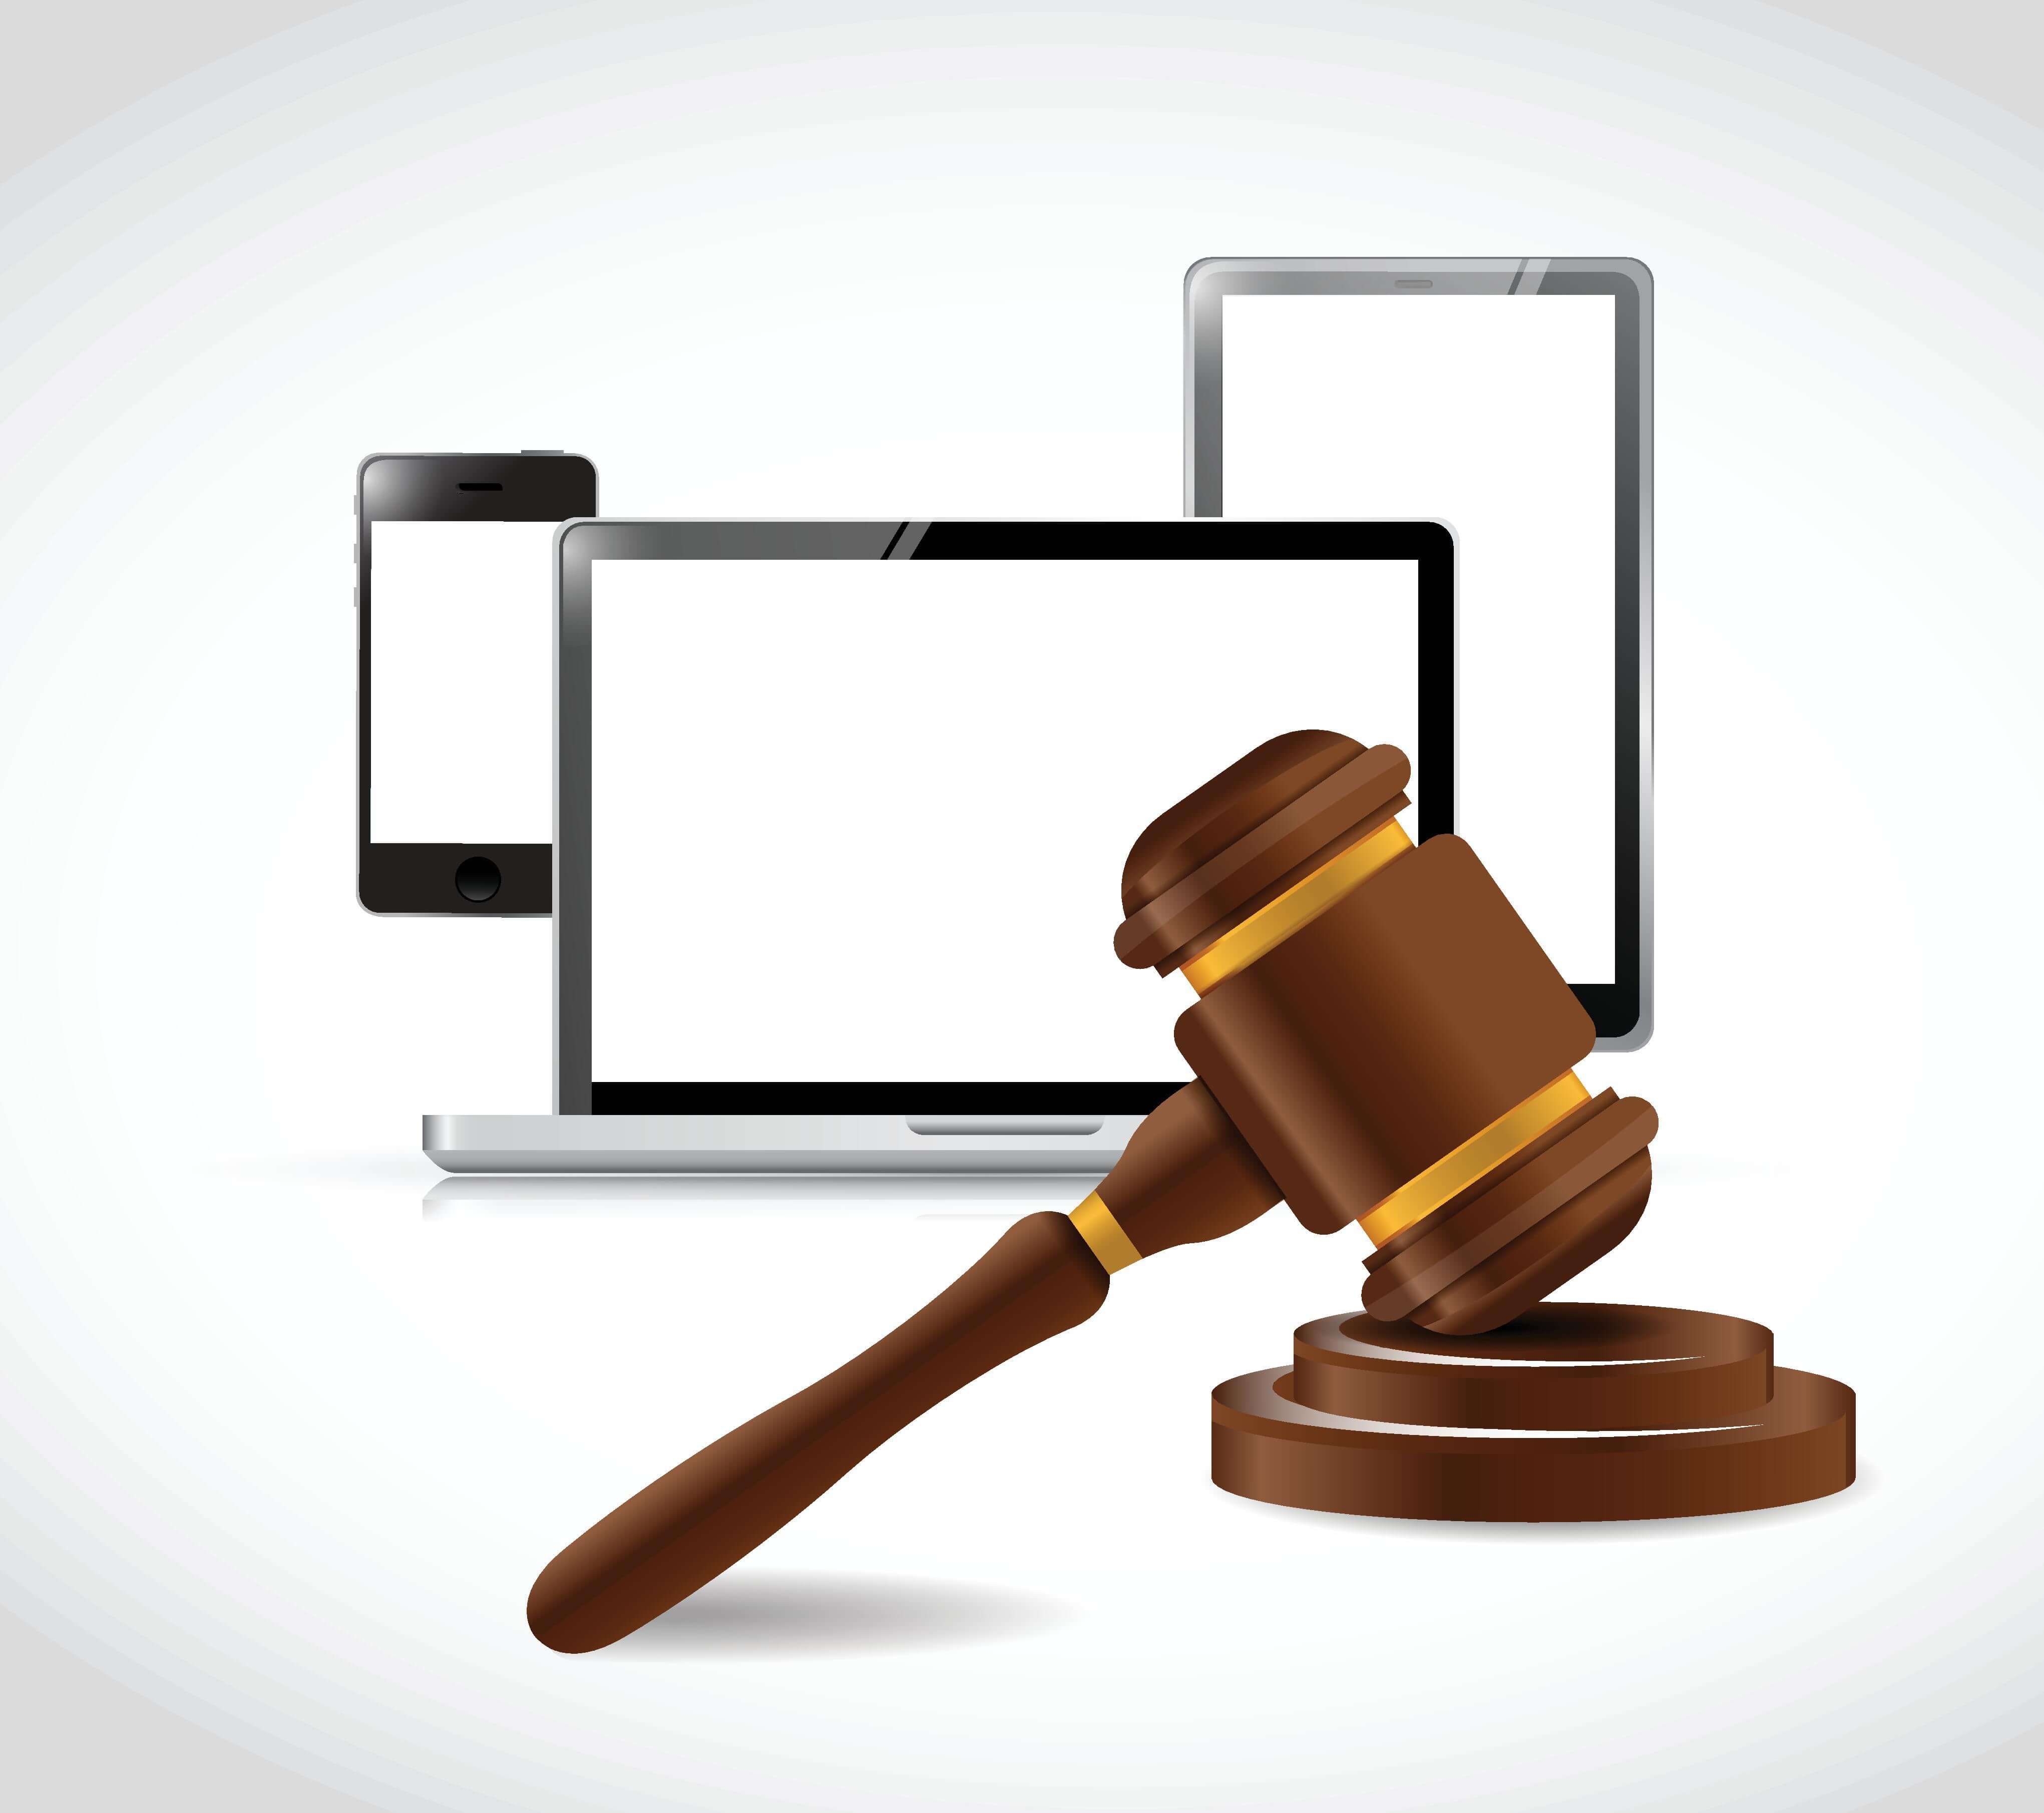 Image of gavel and technology